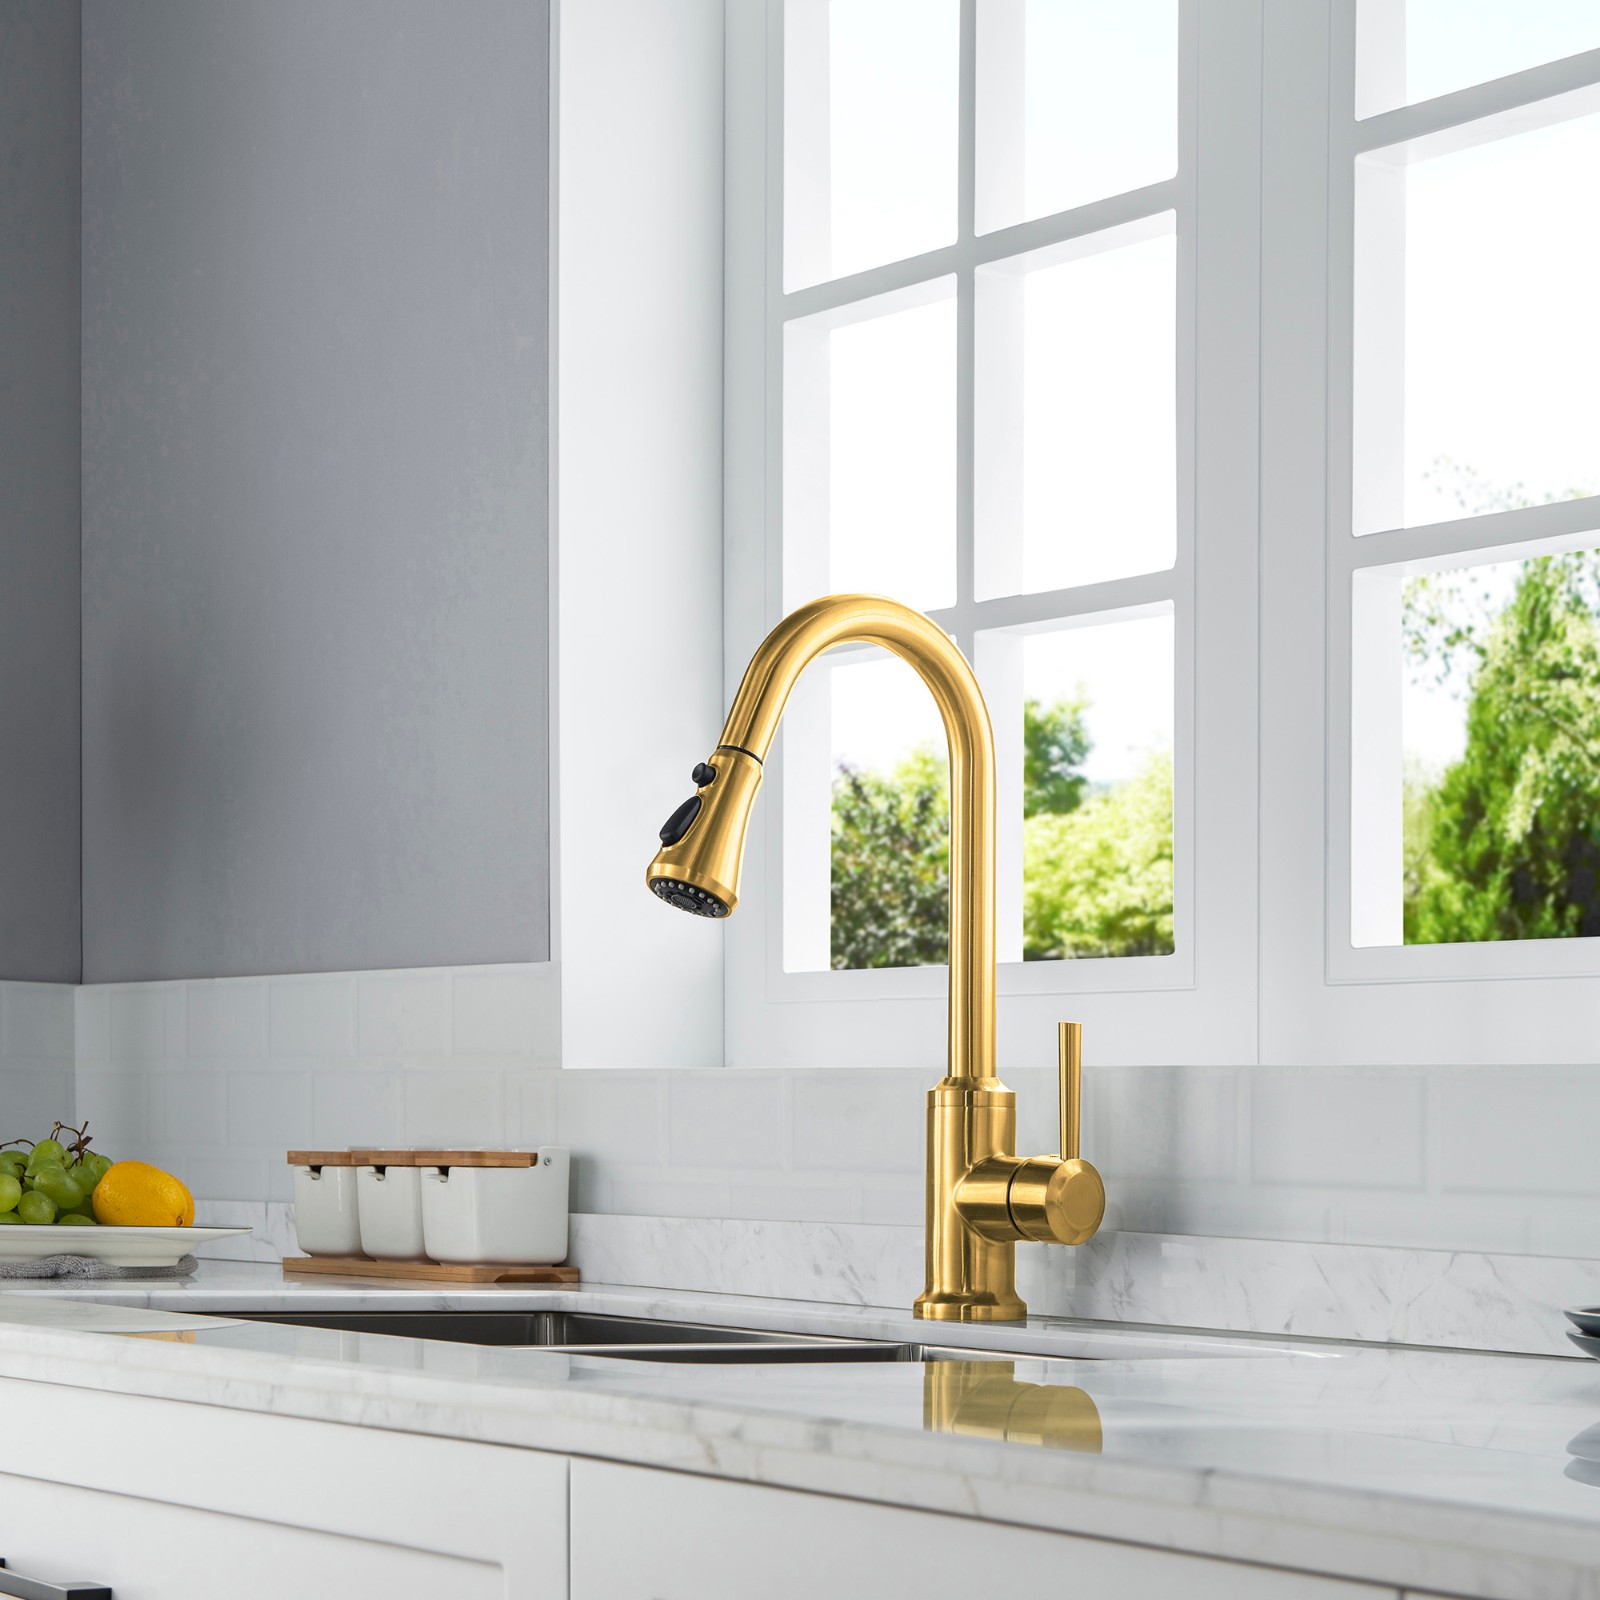  WOODBRIDGE WK101201BG Stainless Steel Single Handle Pull Down Kitchen Faucet in Brushed Gold Finish._4989